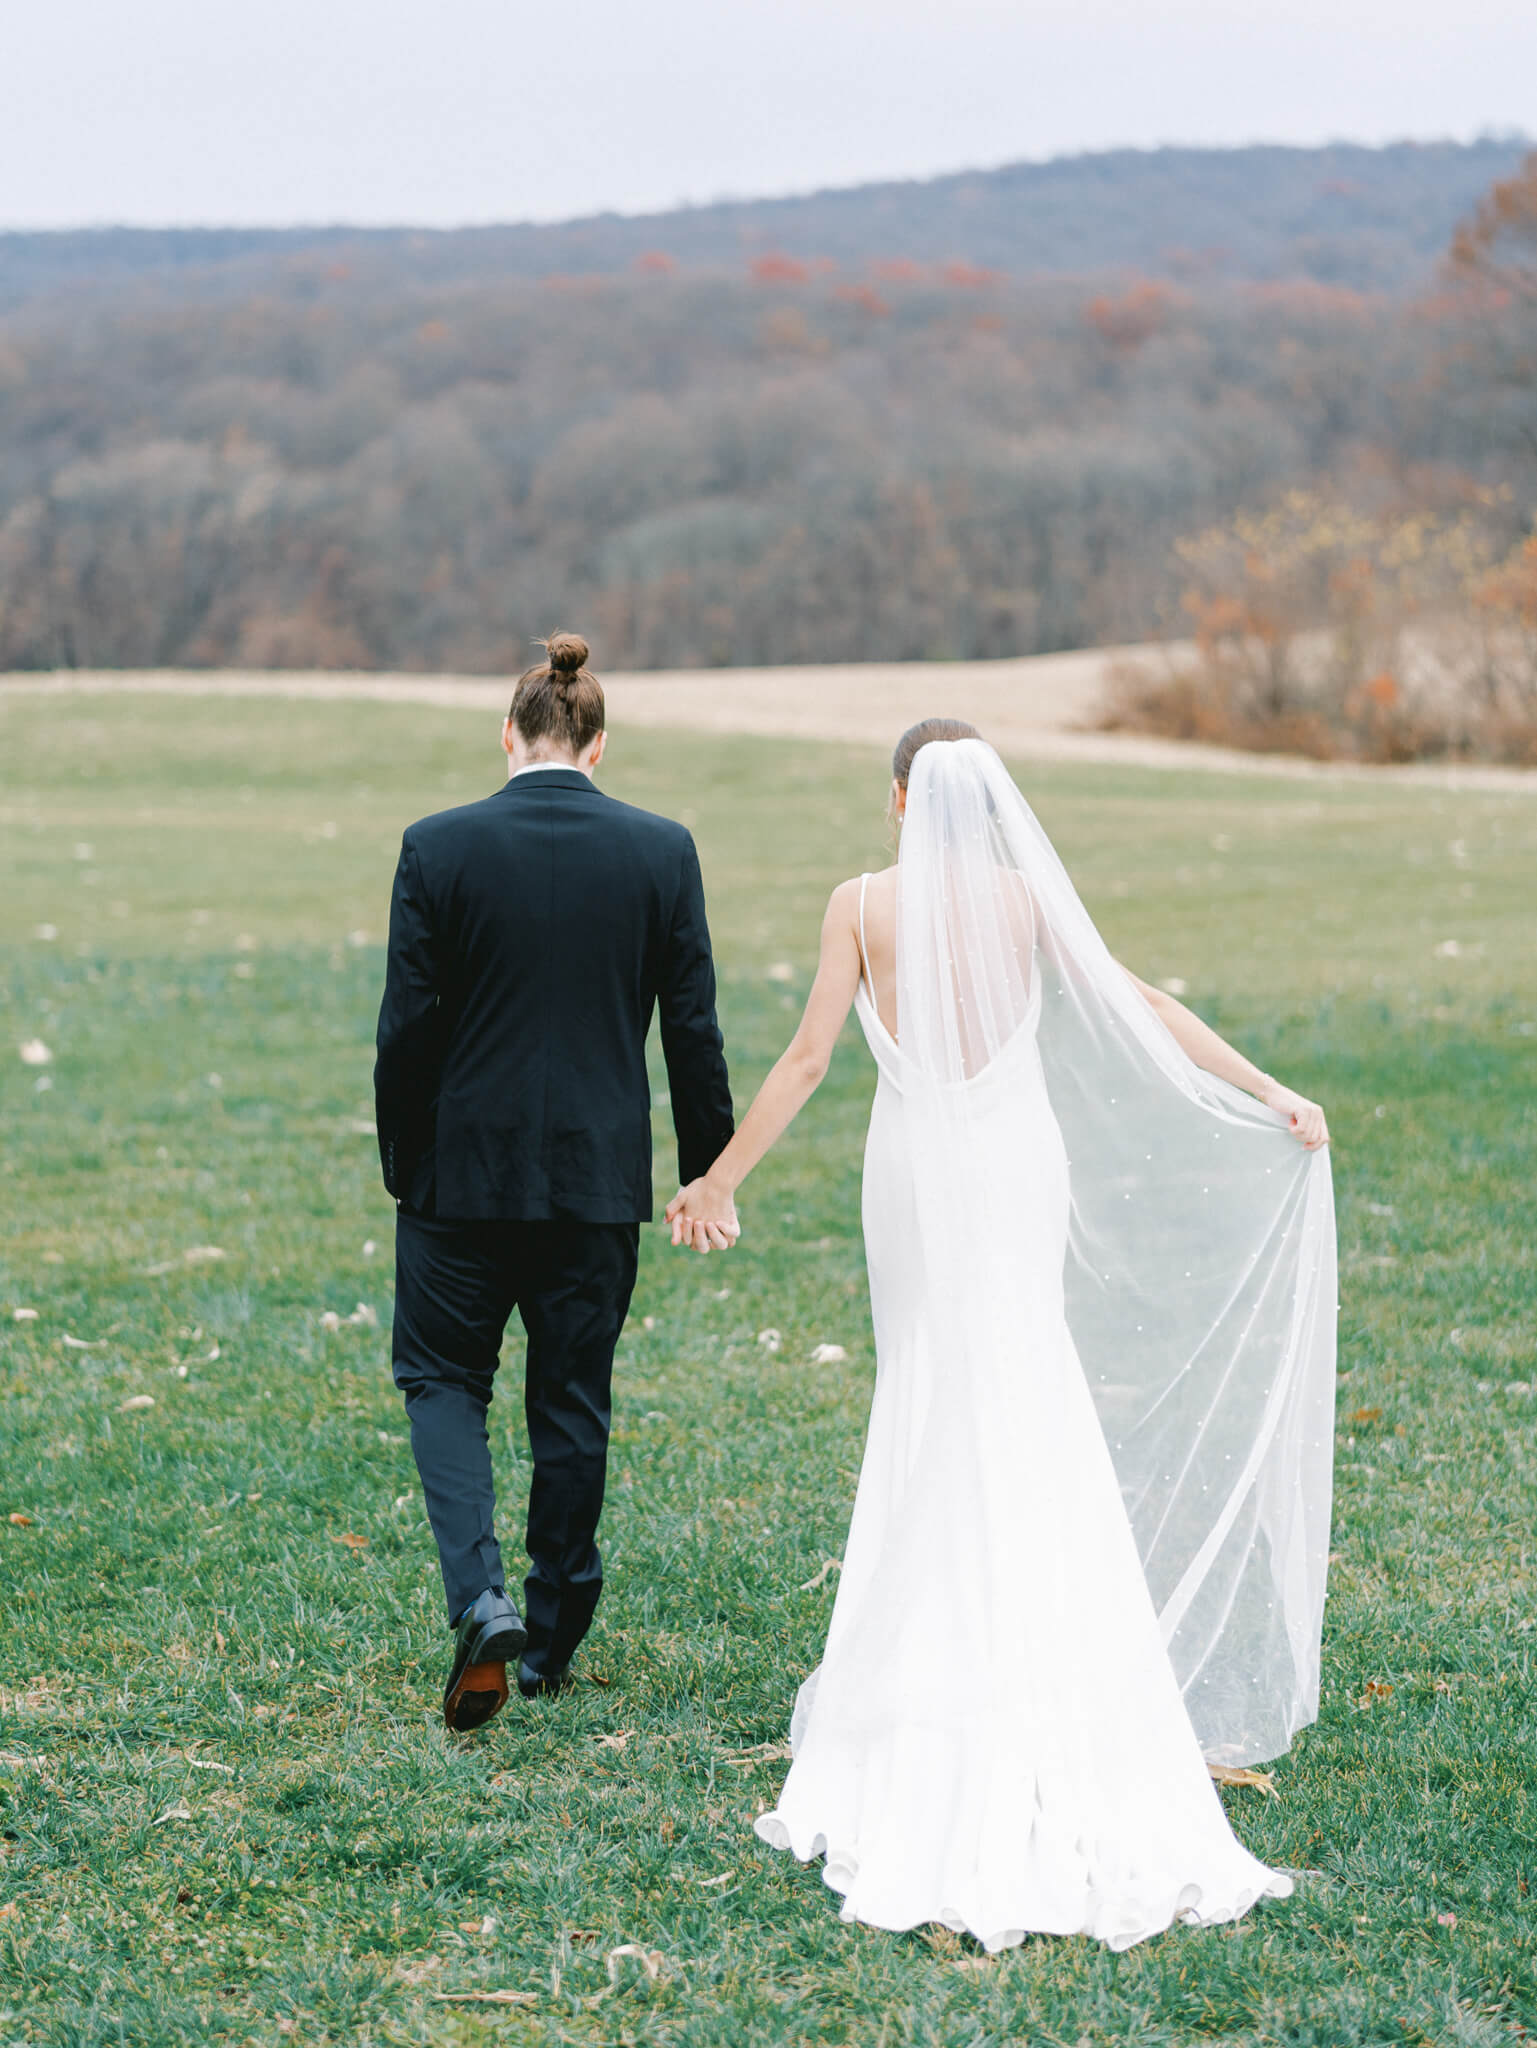 A bride and groom holding hands and walking away towards the mountainous backdrop.